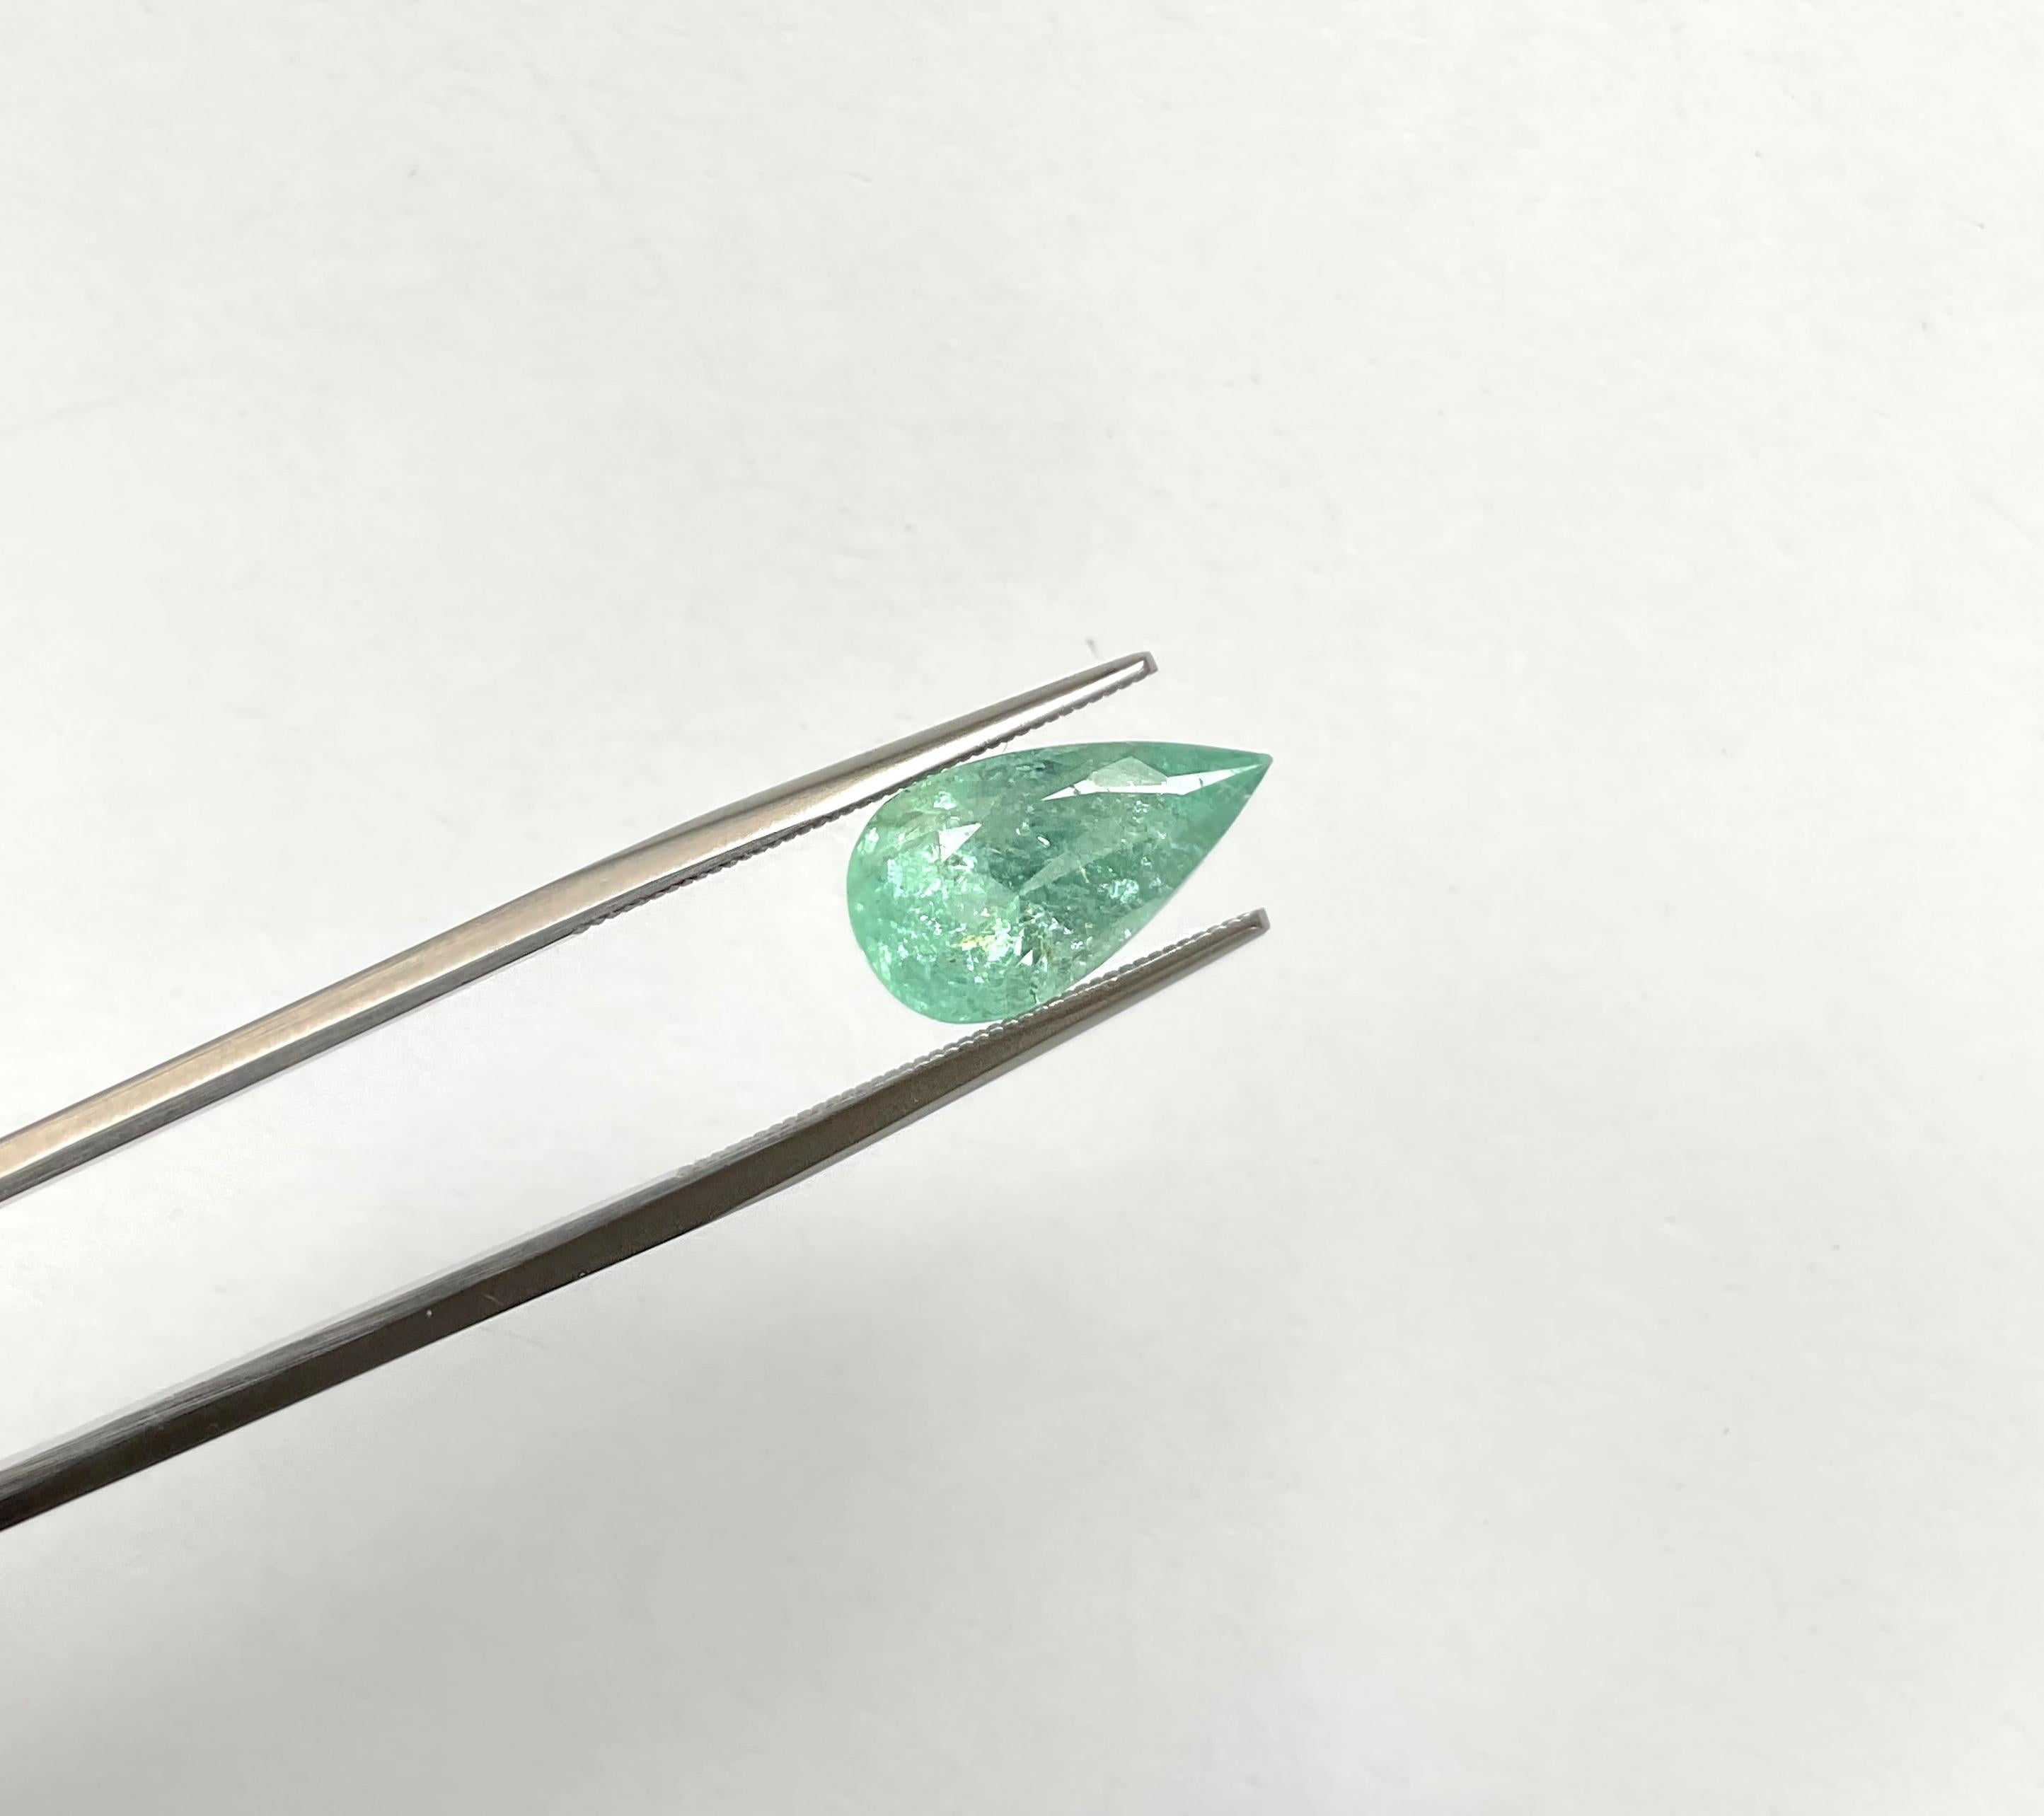 Oval Cut Certified 3.99 Carats Green Paraiba Tourmaline Pear Cut Stone for Fine Jewelry For Sale